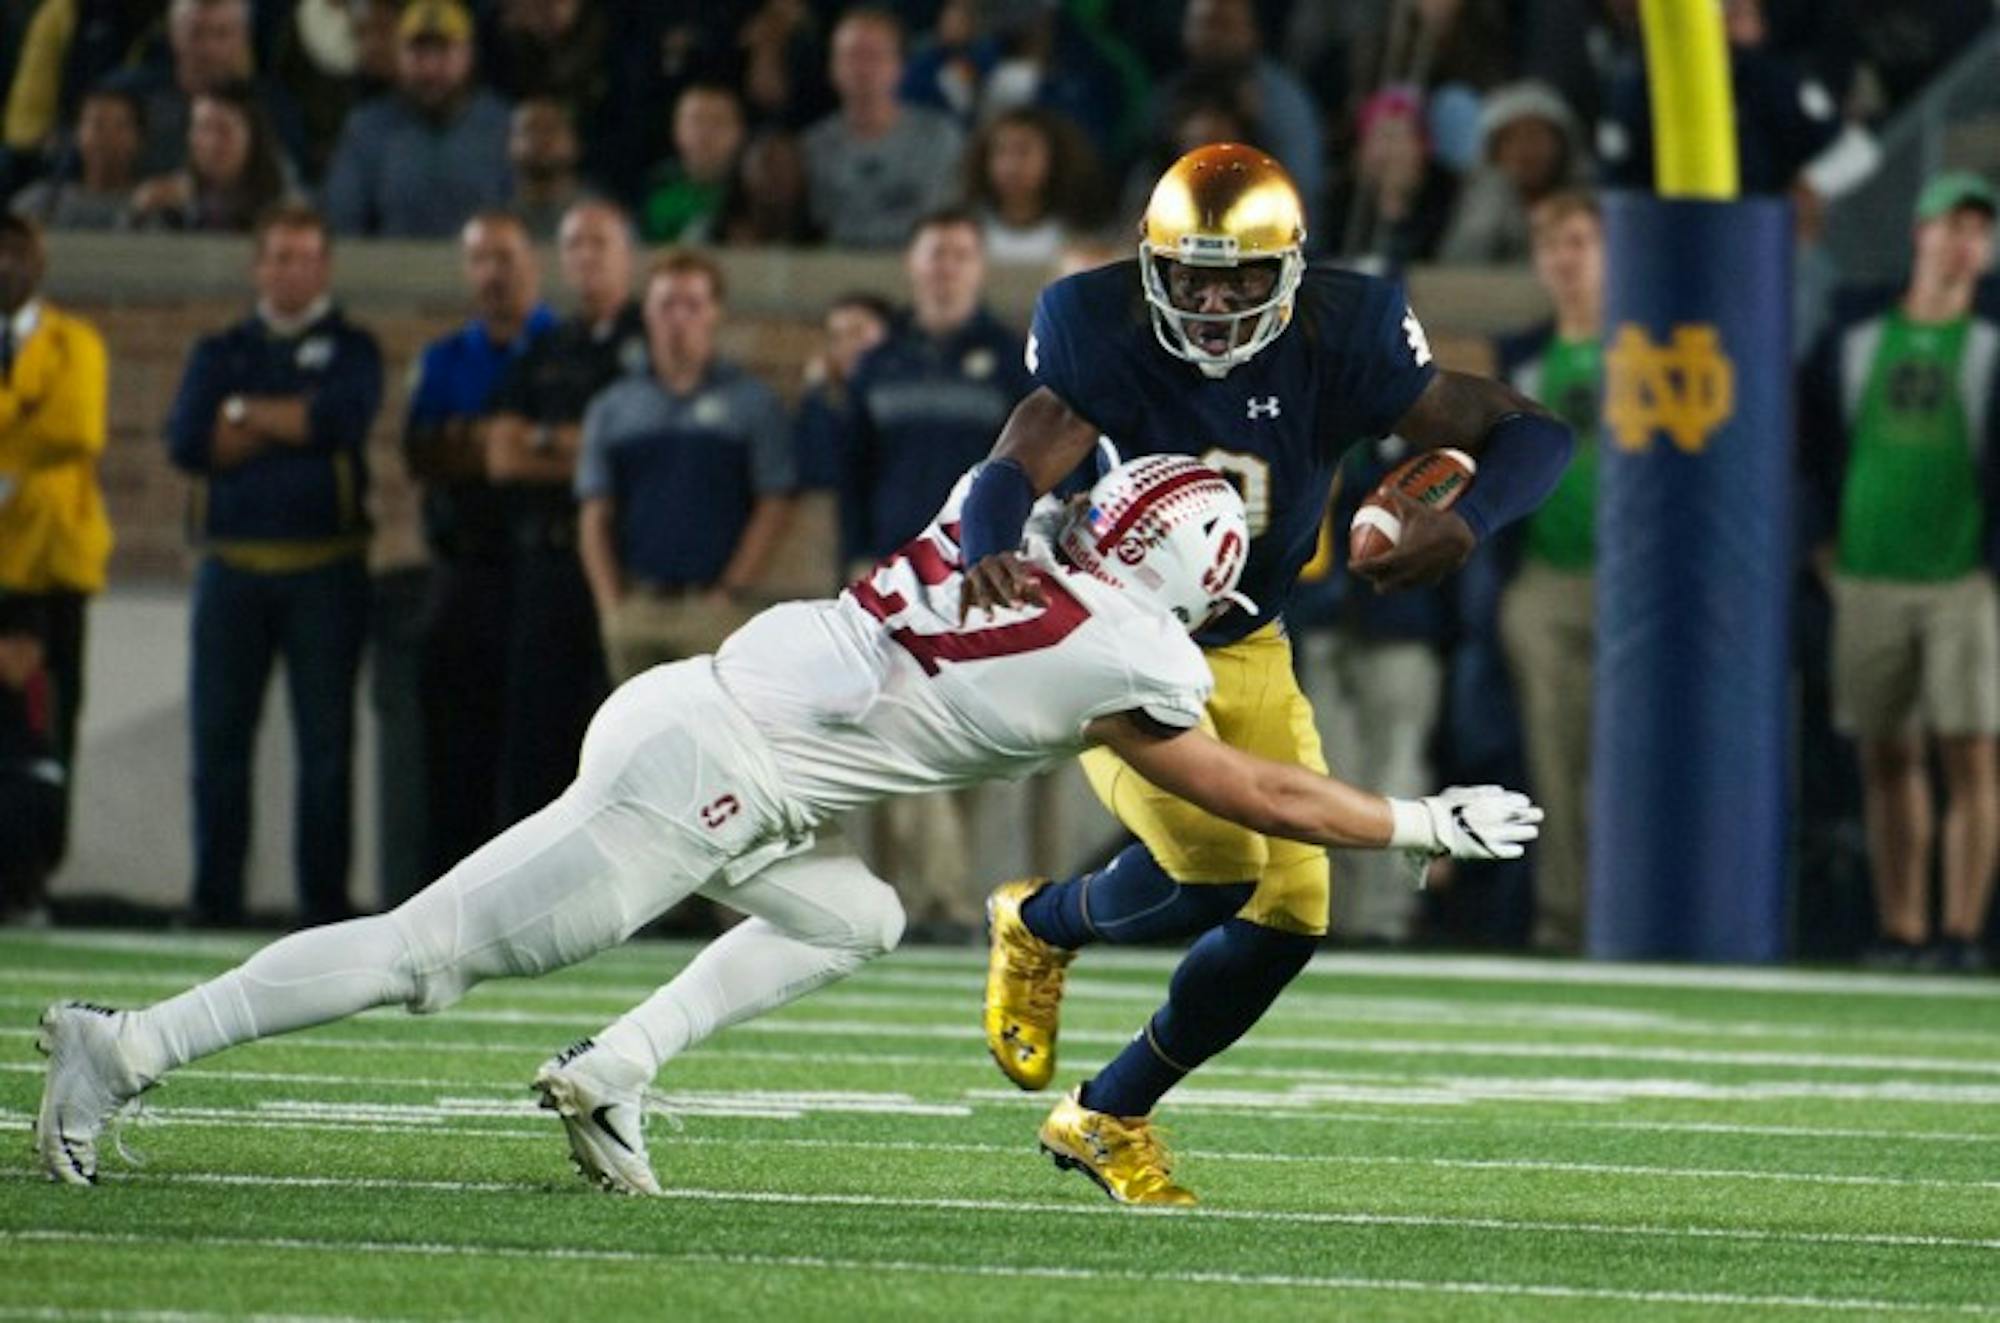 Senior Irish quarterback Malik Zaire is tackled by a Stanford defender in Notre Dame's 17-10 loss to the Cardinal on Saturday.